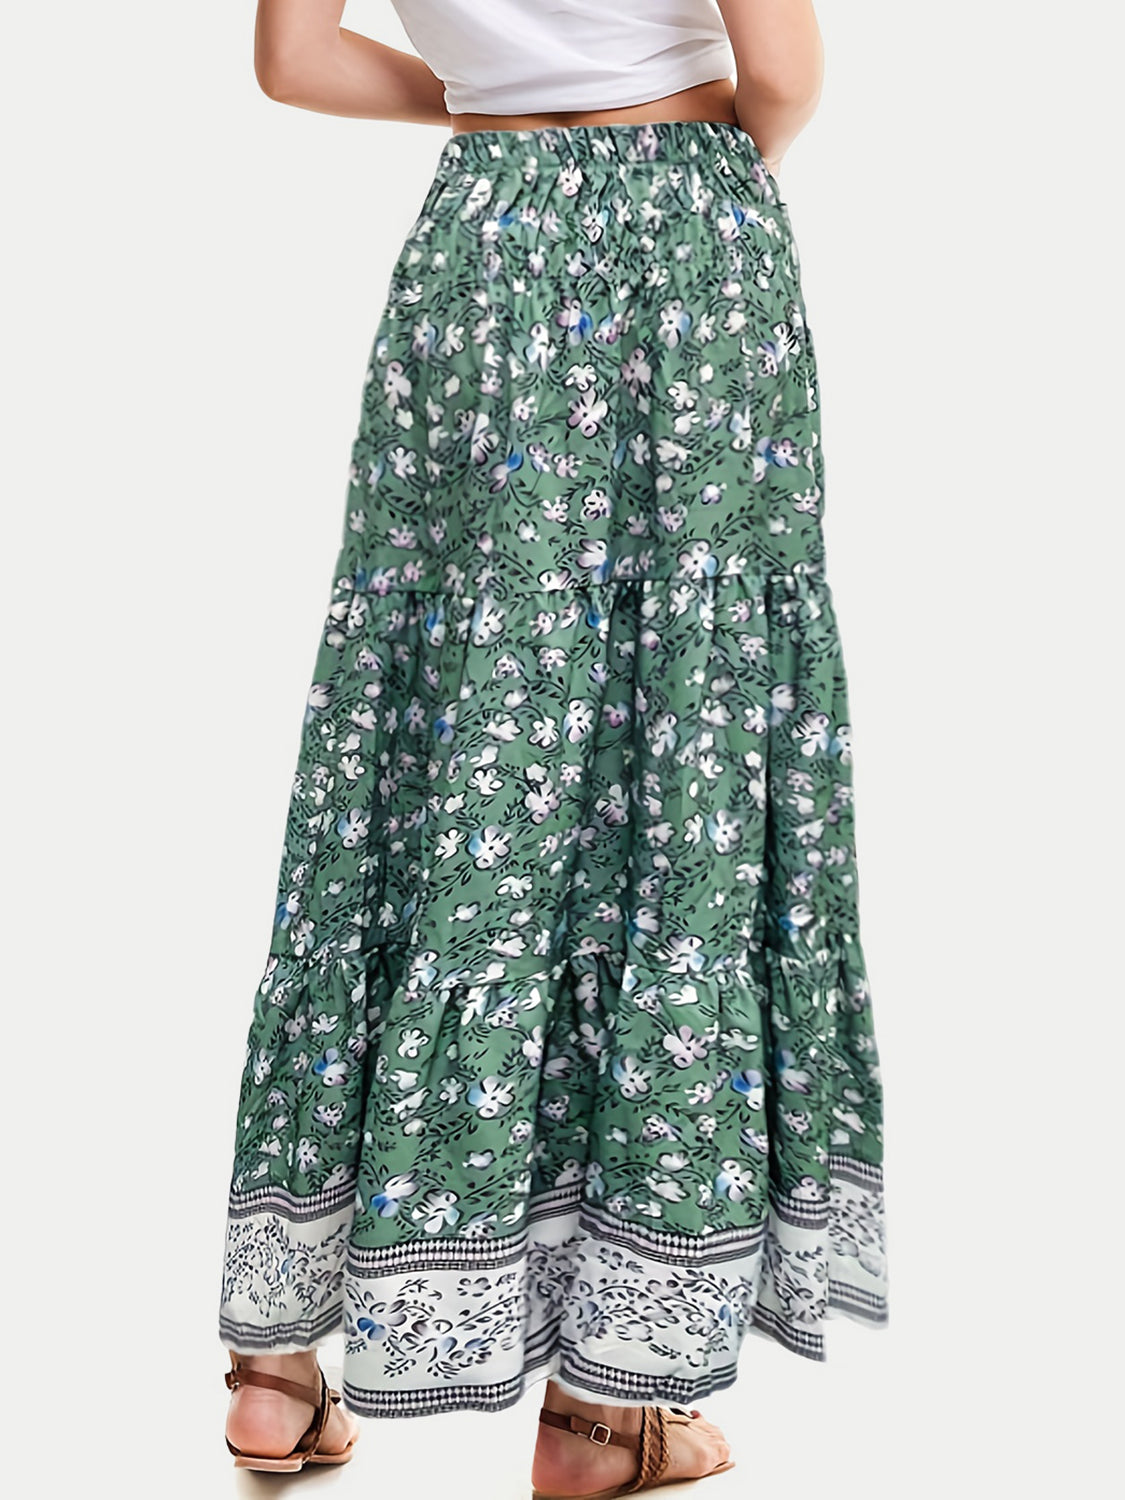 Full Size Tiered Printed Elastic Waist Skirt [ Click for more options]